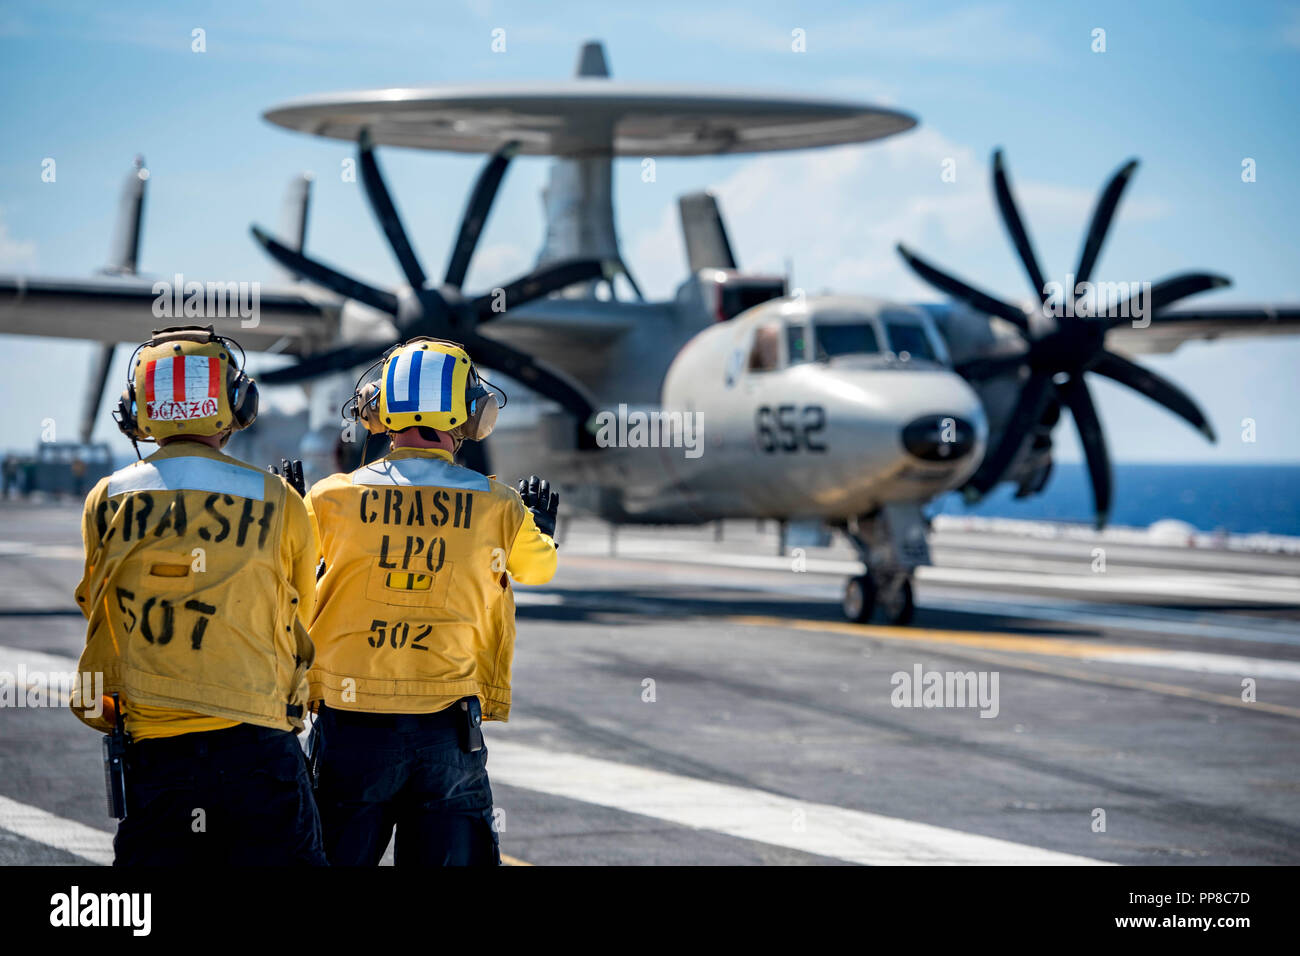 180917-N-SO730-0064 ATLANTIC OCEAN (Sept. 17, 2018) Aviation Boatswain's Mate (Handling) 1st Class John Back, right, from Jackson, New York, under the direction of Aviation Boatswain's Mate (Handling) 2nd Class Ismael Gabriel Gonzales, from Newburgh, New York, spots an E-2C Hawkeye, assigned to Carrier Airborne Early Warning Squadron (VAW) 124, during flight operations aboard the aircraft carrier USS George H.W. Bush (CVN 77). GHWB is underway in the Atlantic Ocean conducting routine training exercises to maintain carrier readiness. (U.S. Navy photo by Mass Communication Specialist 3rd Class J Stock Photo